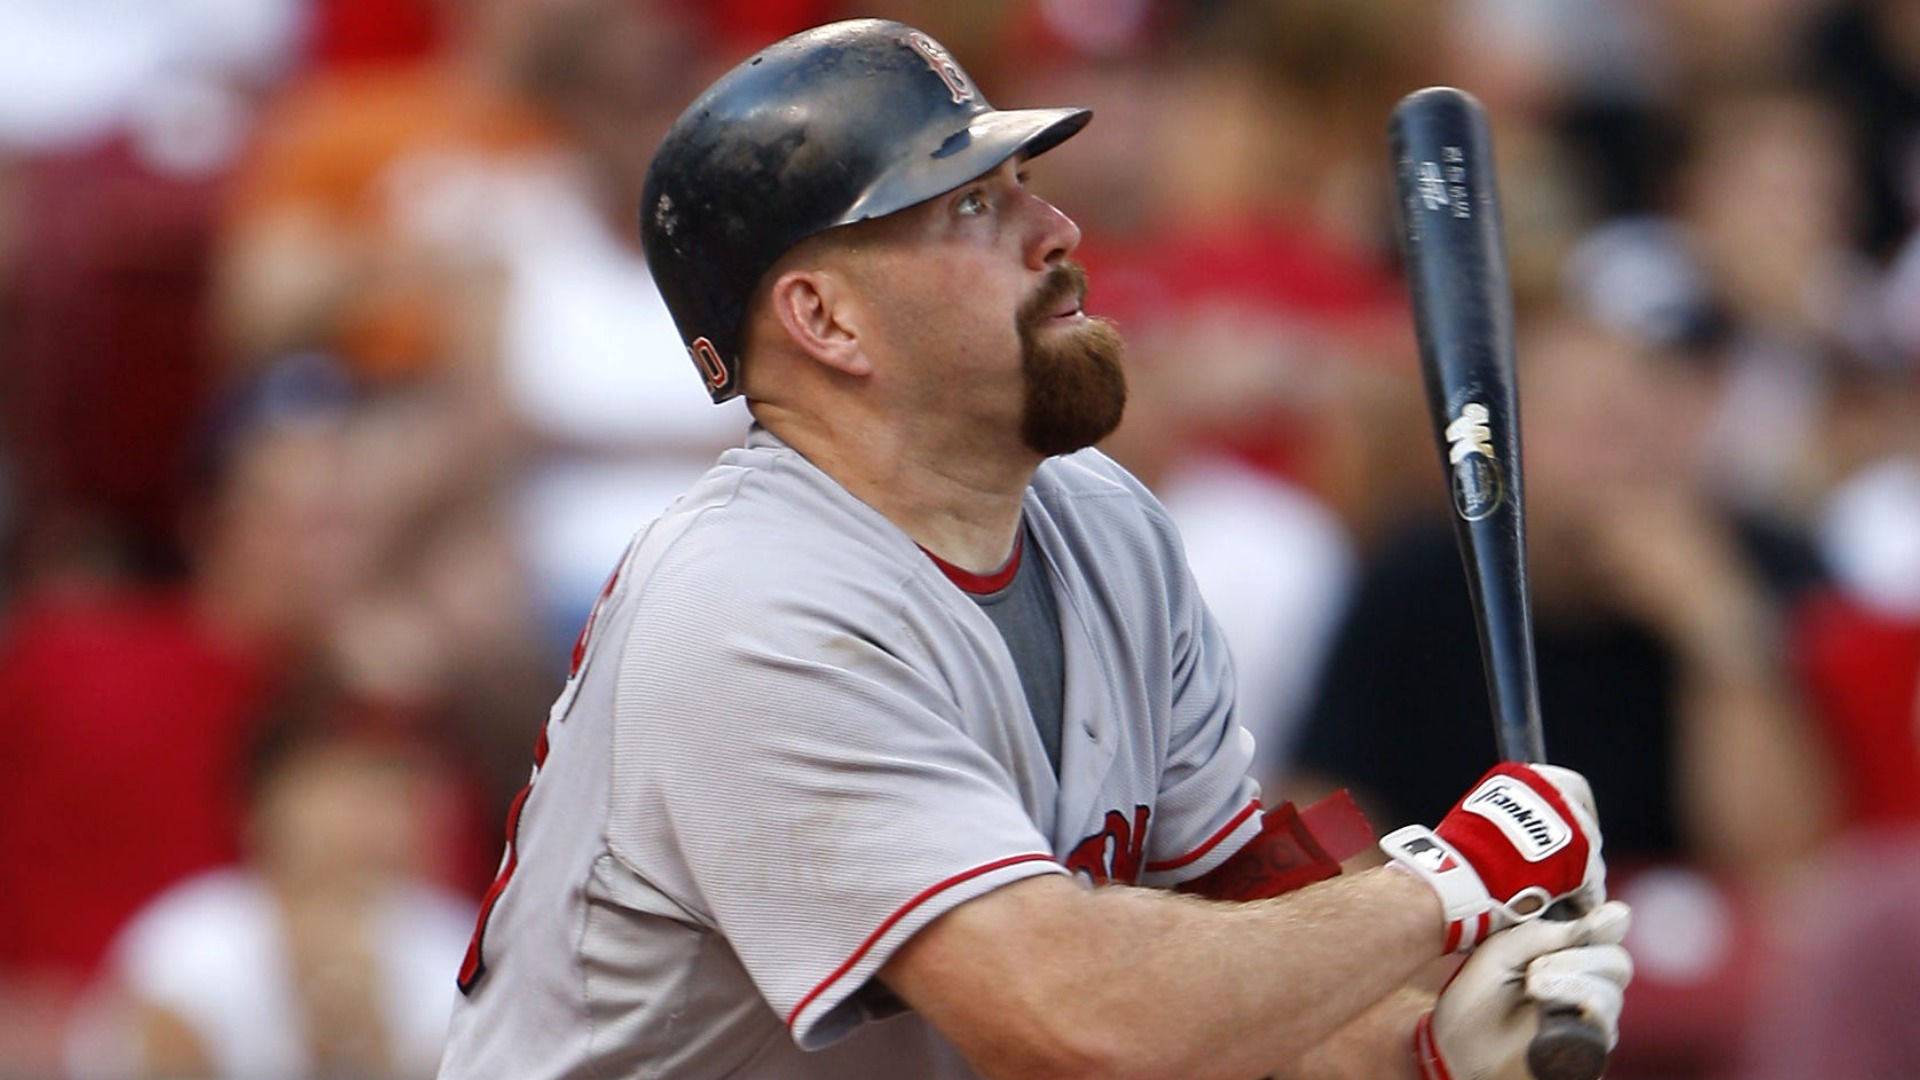 Why Kevin Youkilis decided to get into broadcasting after all